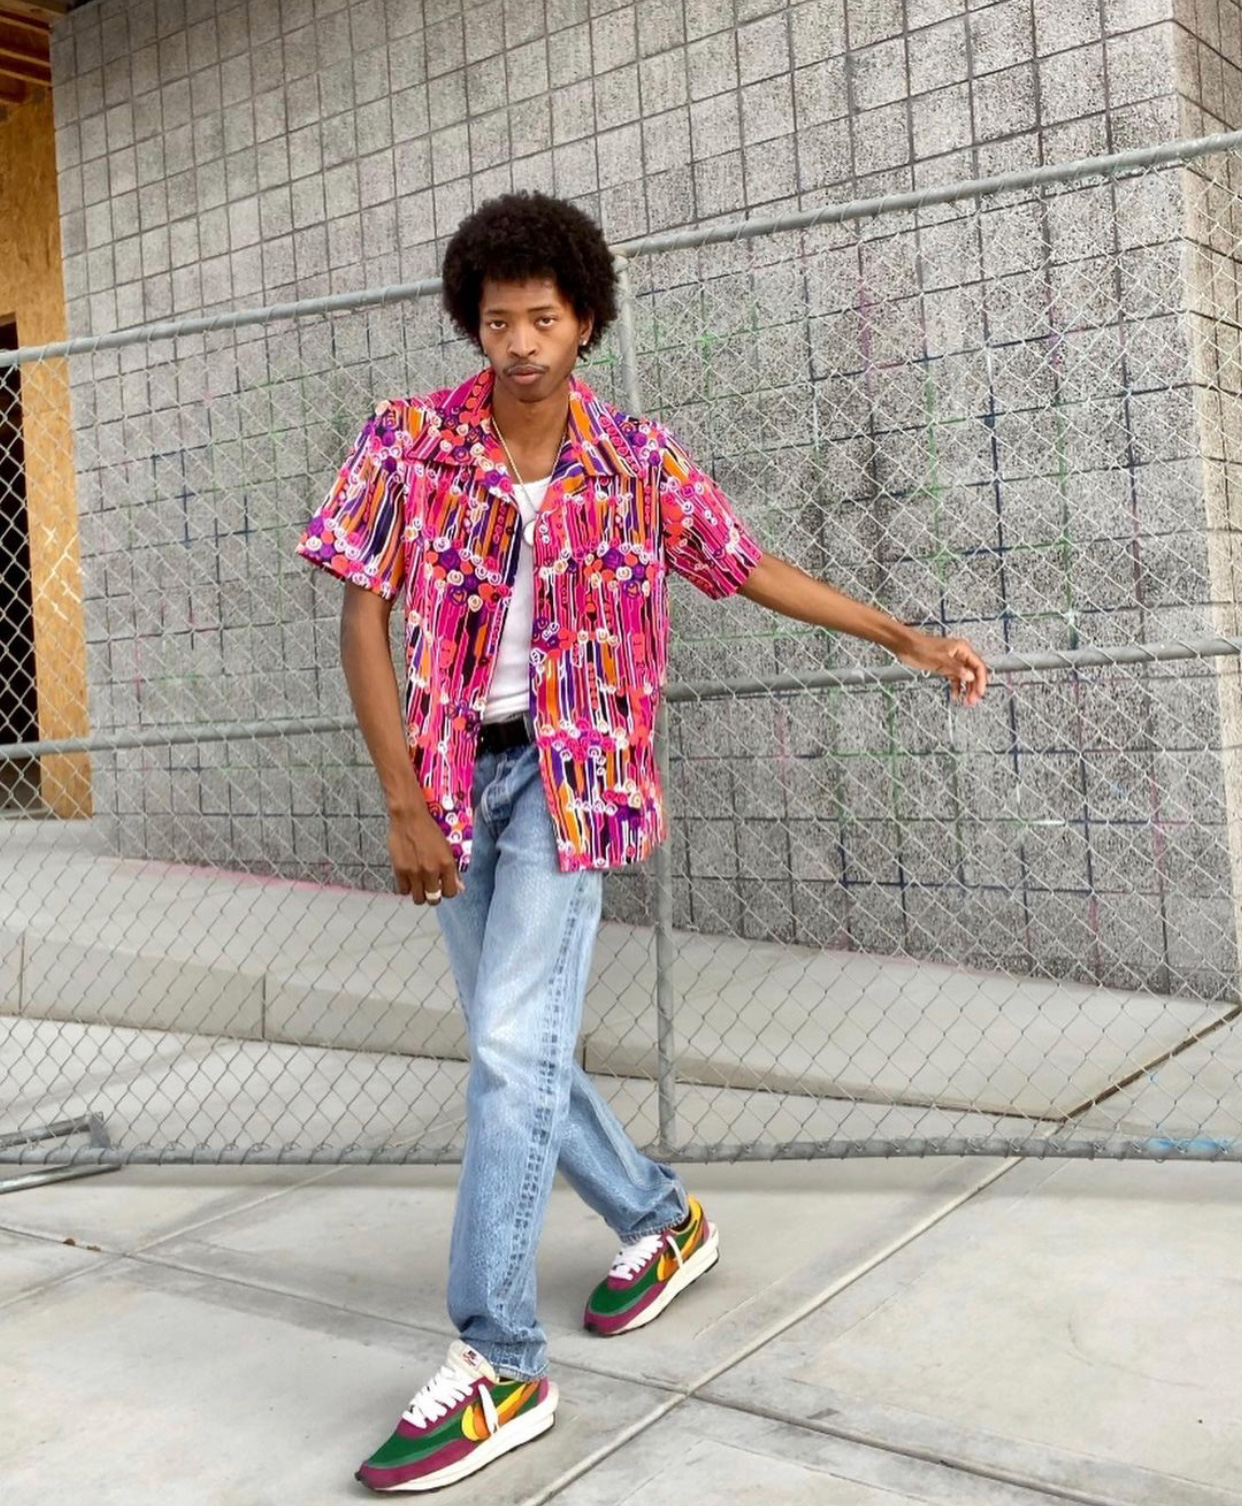 Katriel wearing an unbuttoned pink abstract-print short-sleeve shirt with a white t-shirt underneath, light wash denim, and colorful Nikes